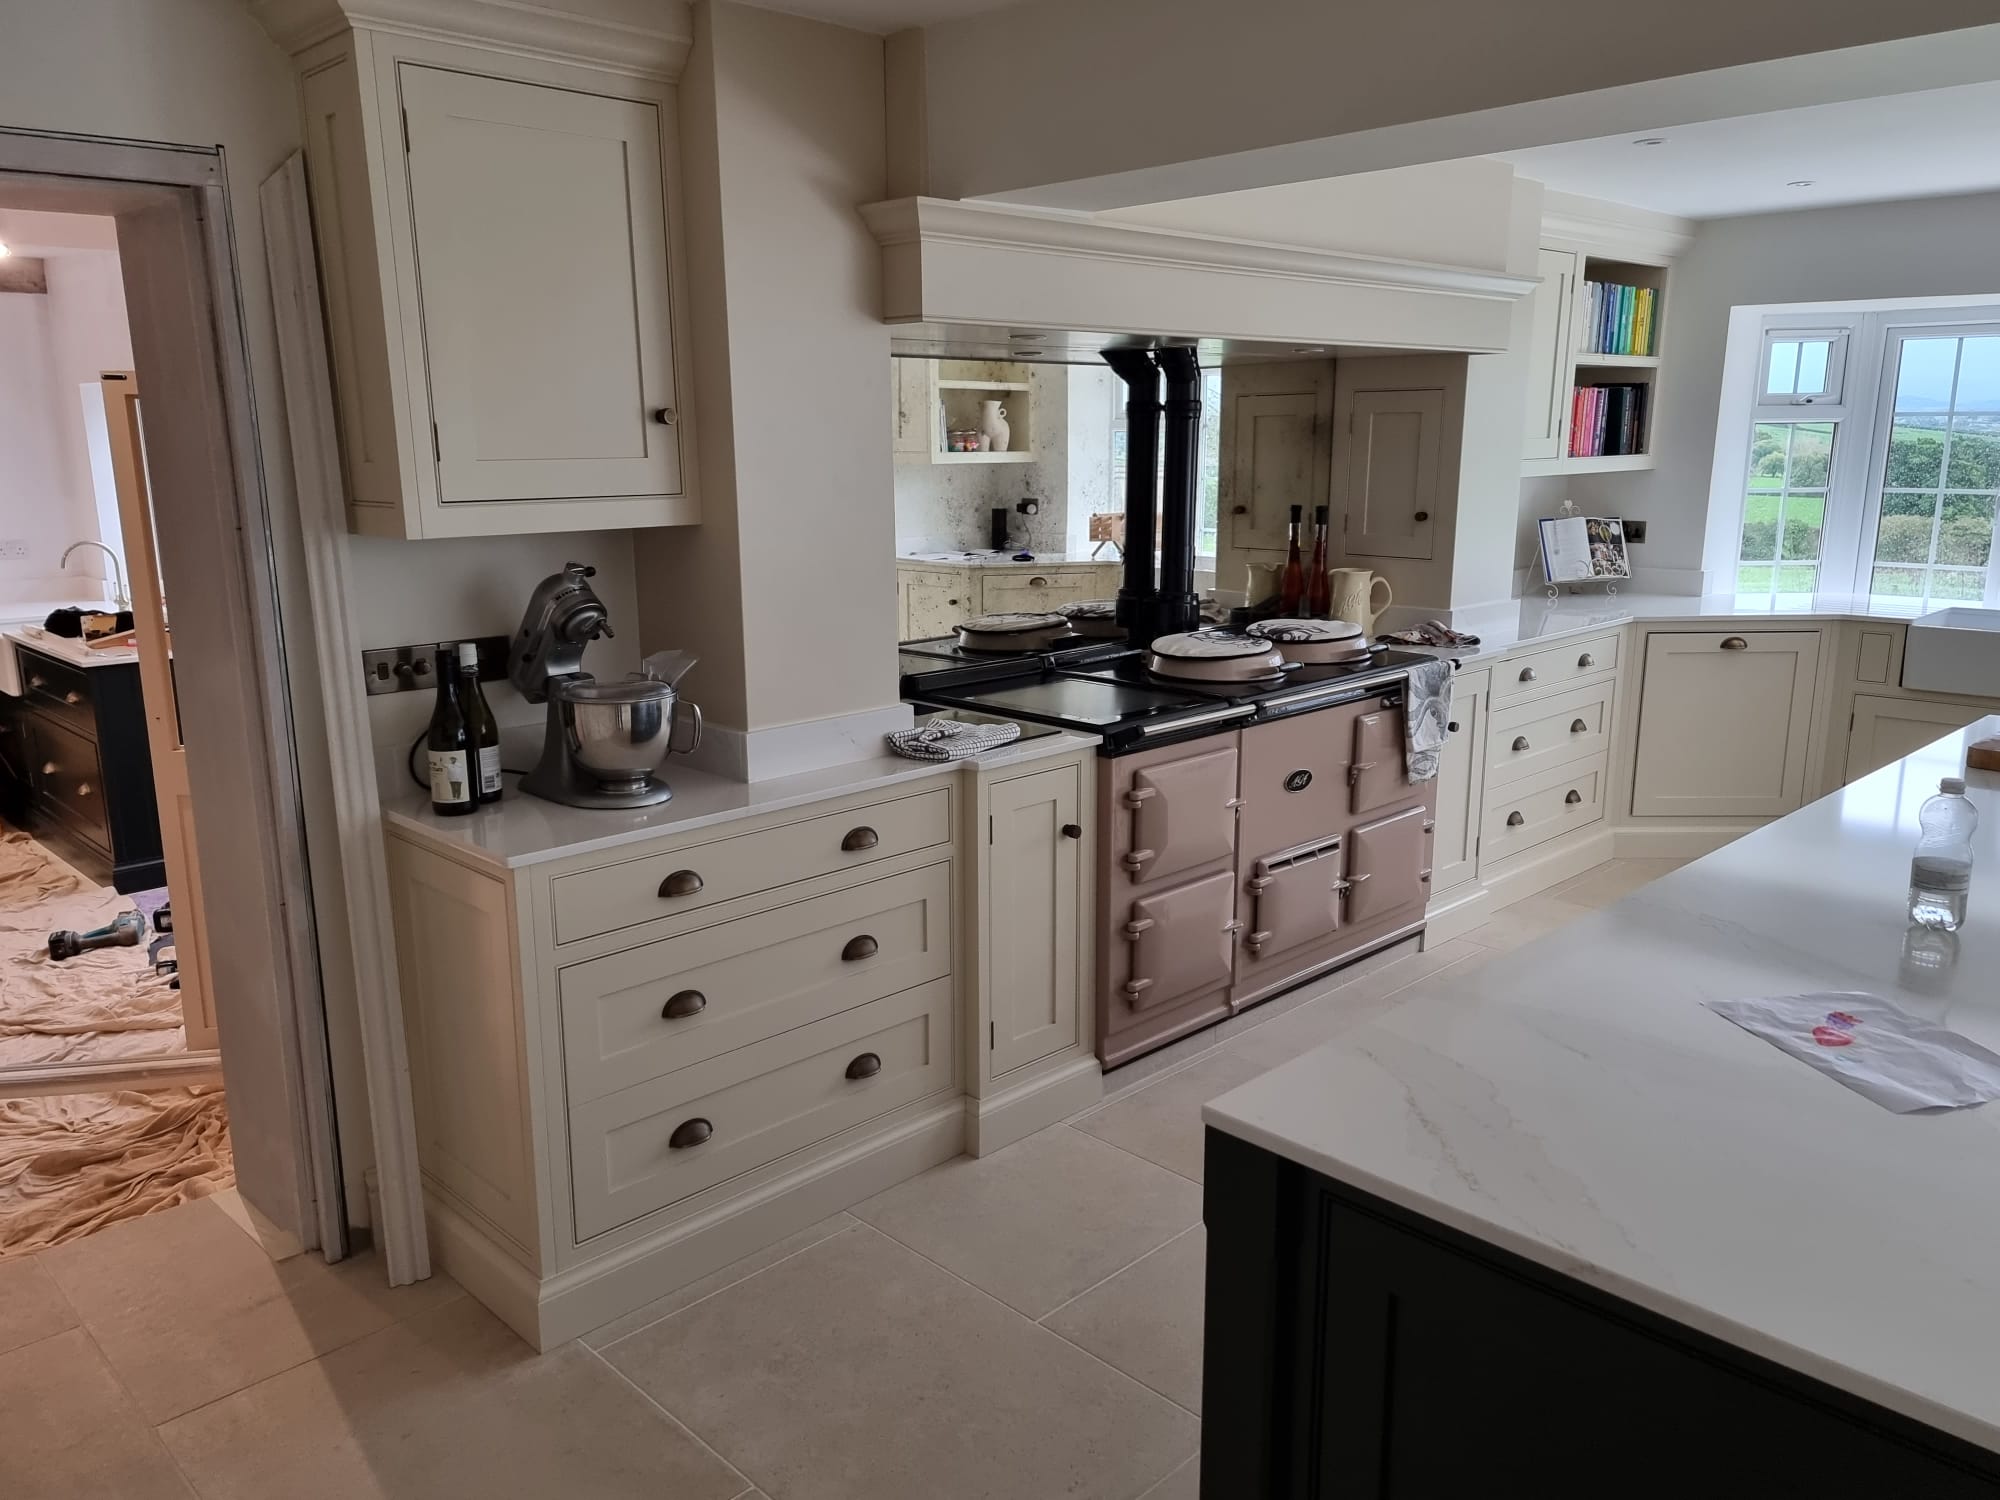 Bespoke timber kitchen units by Kings Stag Joinery